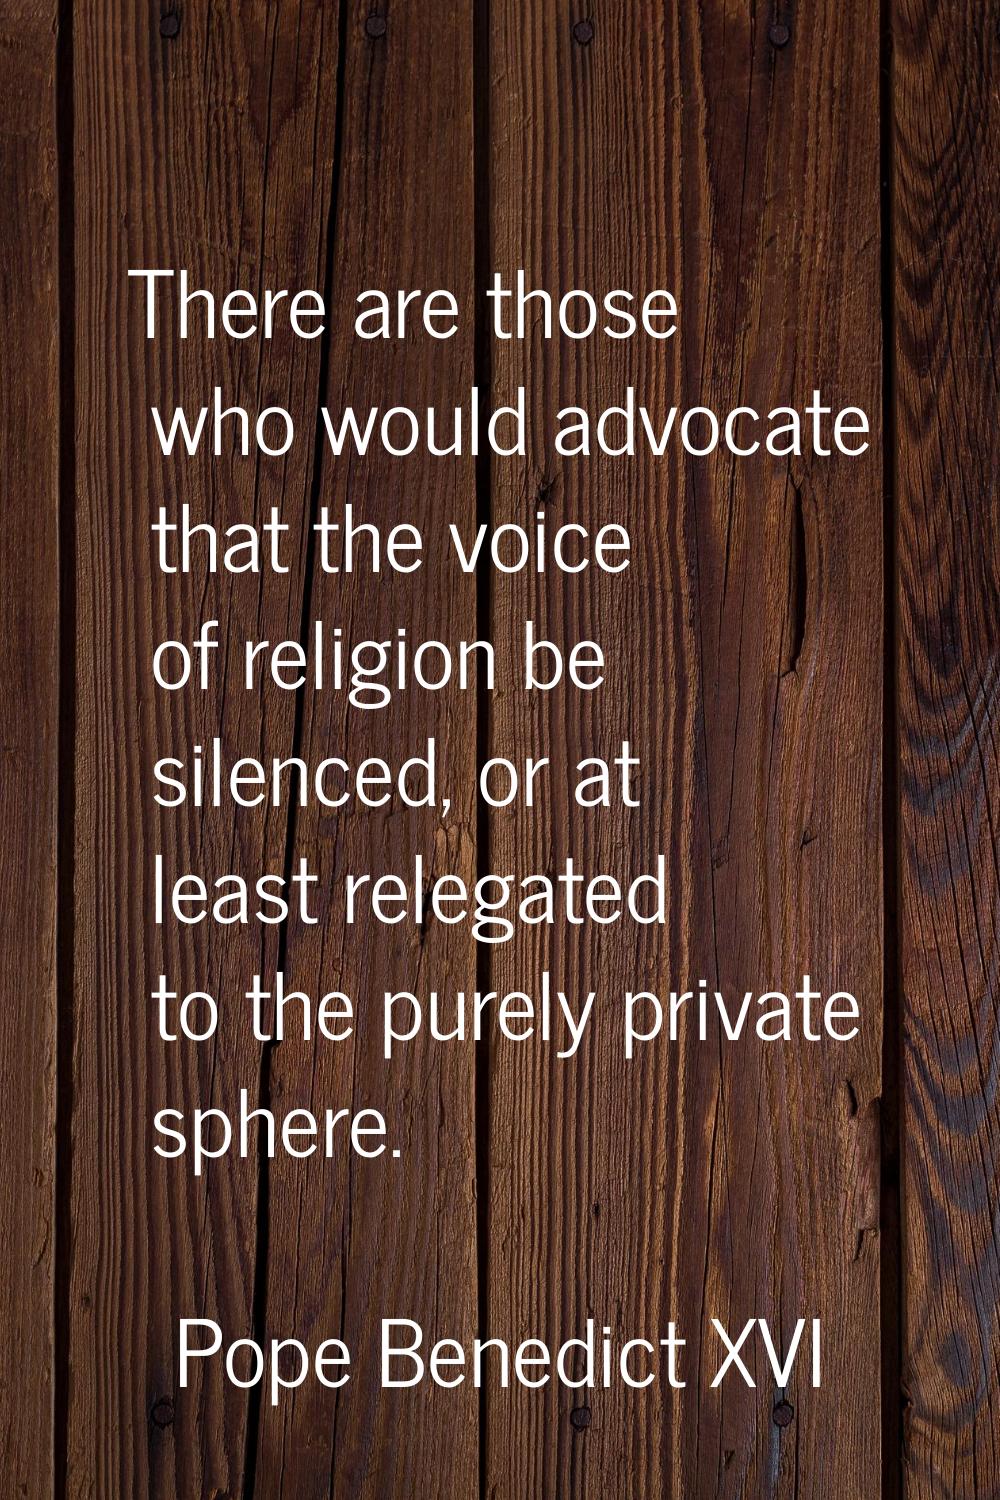 There are those who would advocate that the voice of religion be silenced, or at least relegated to